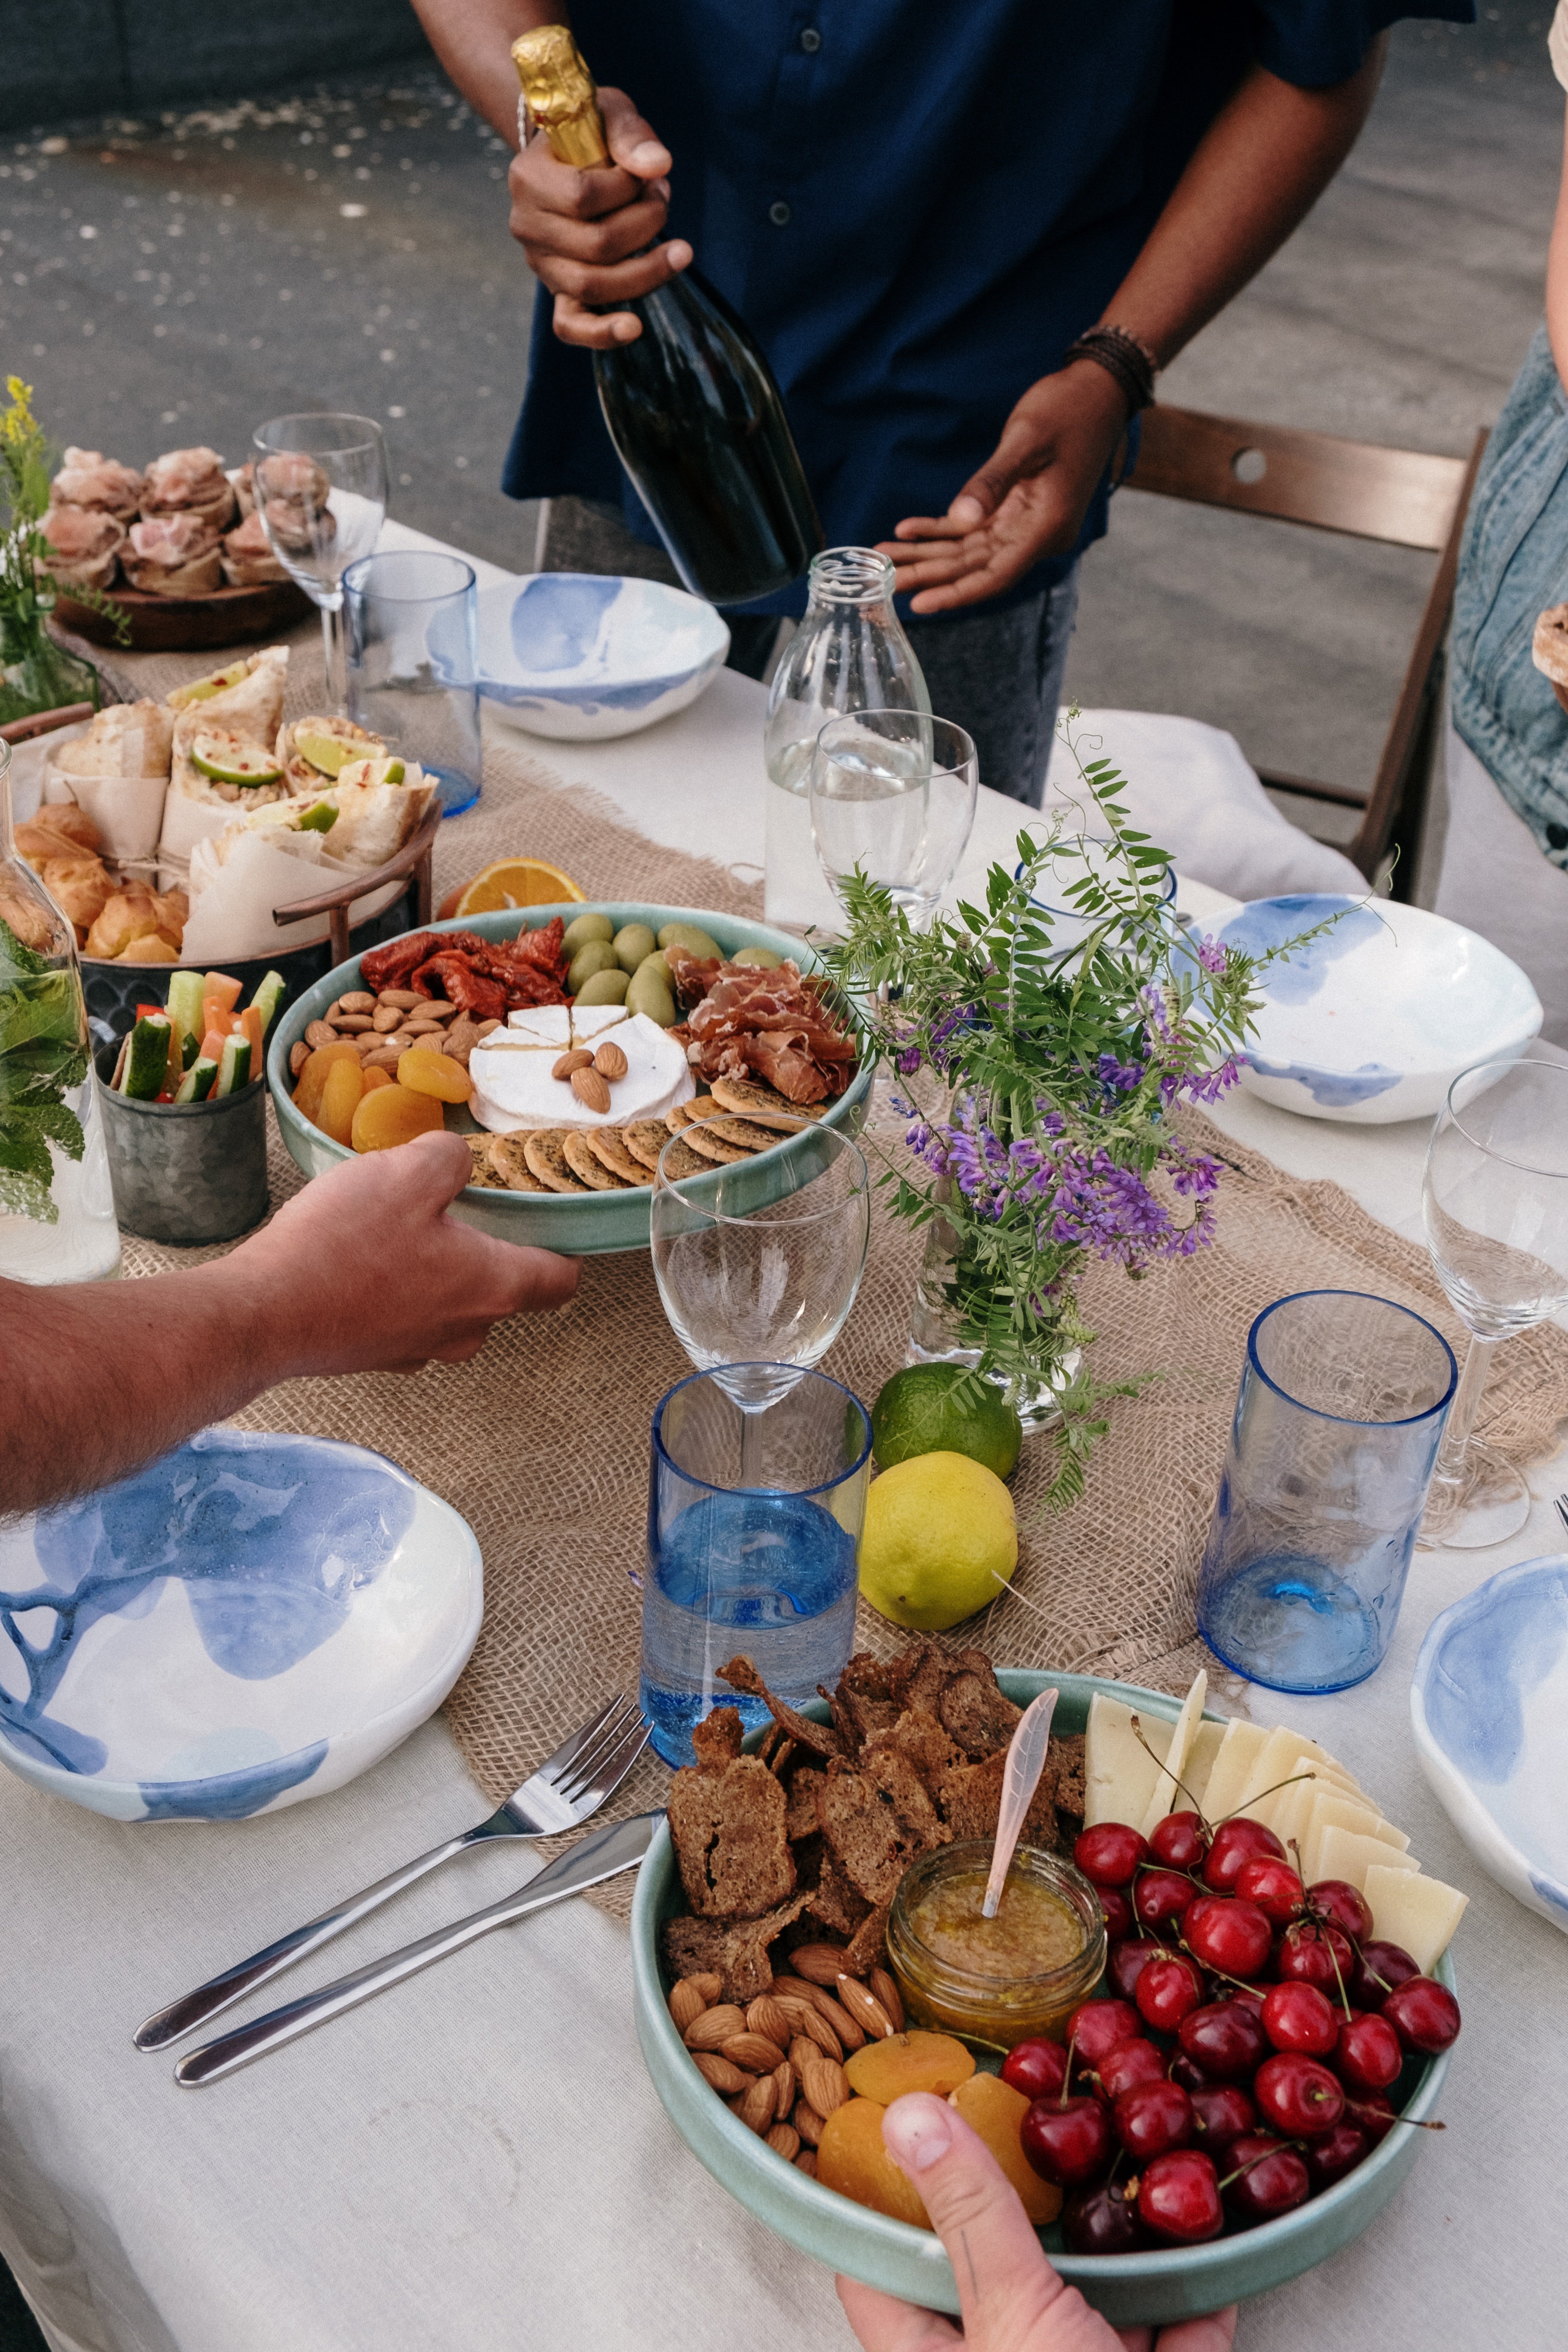 Snacks on the table at a dinner party. | Pexels